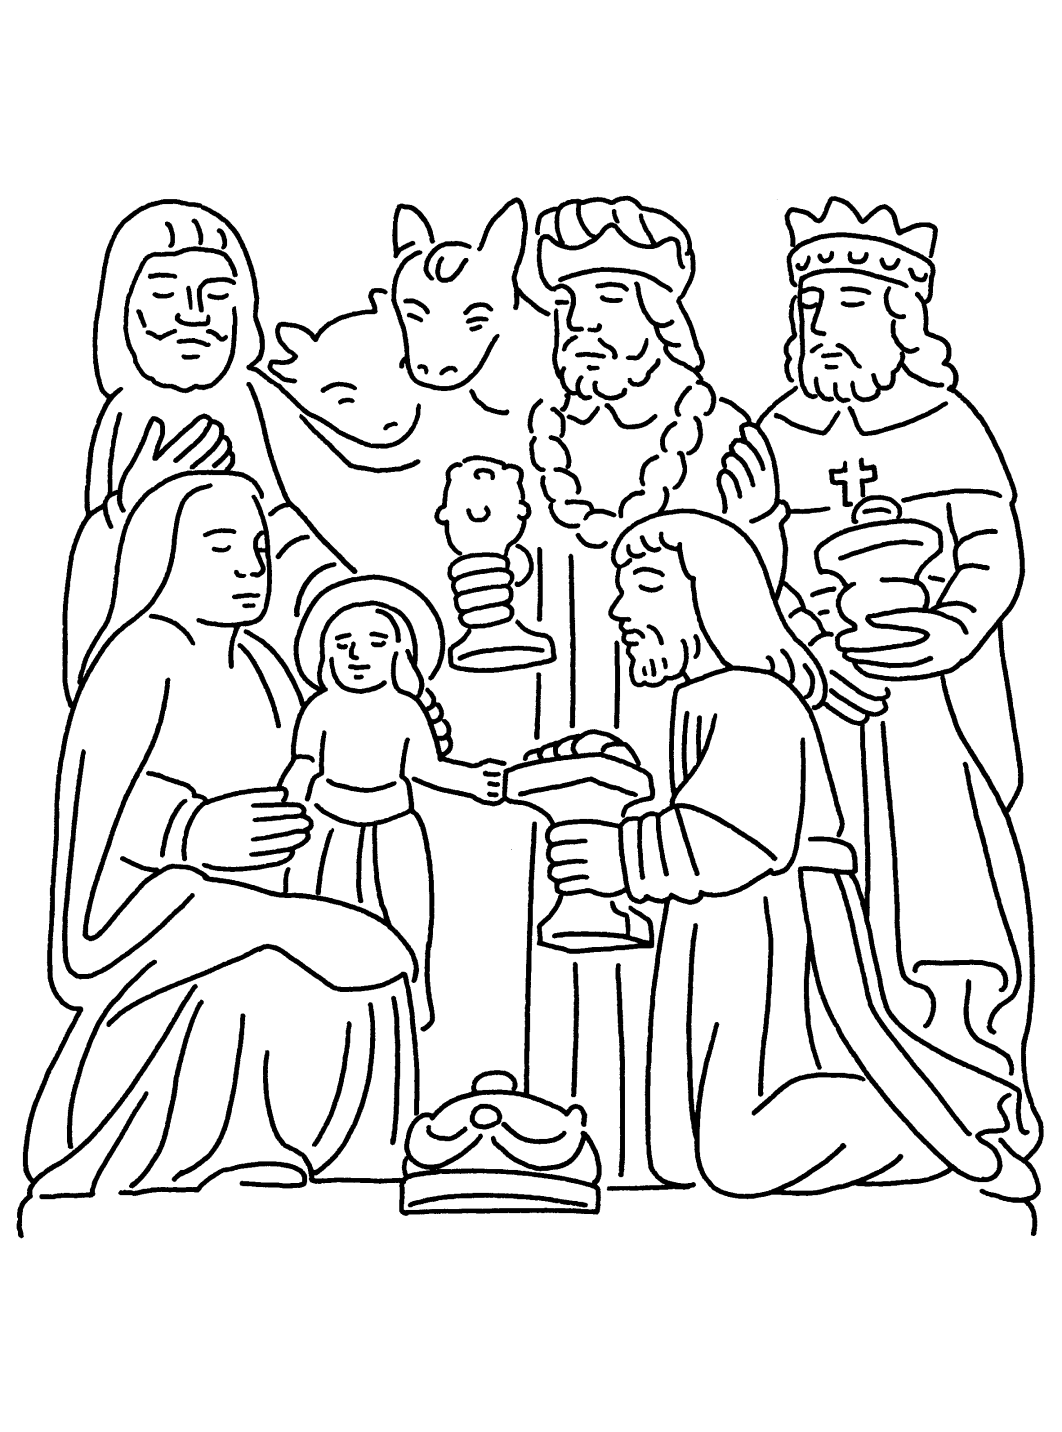 Coloring of the Magi with the baby Jesus